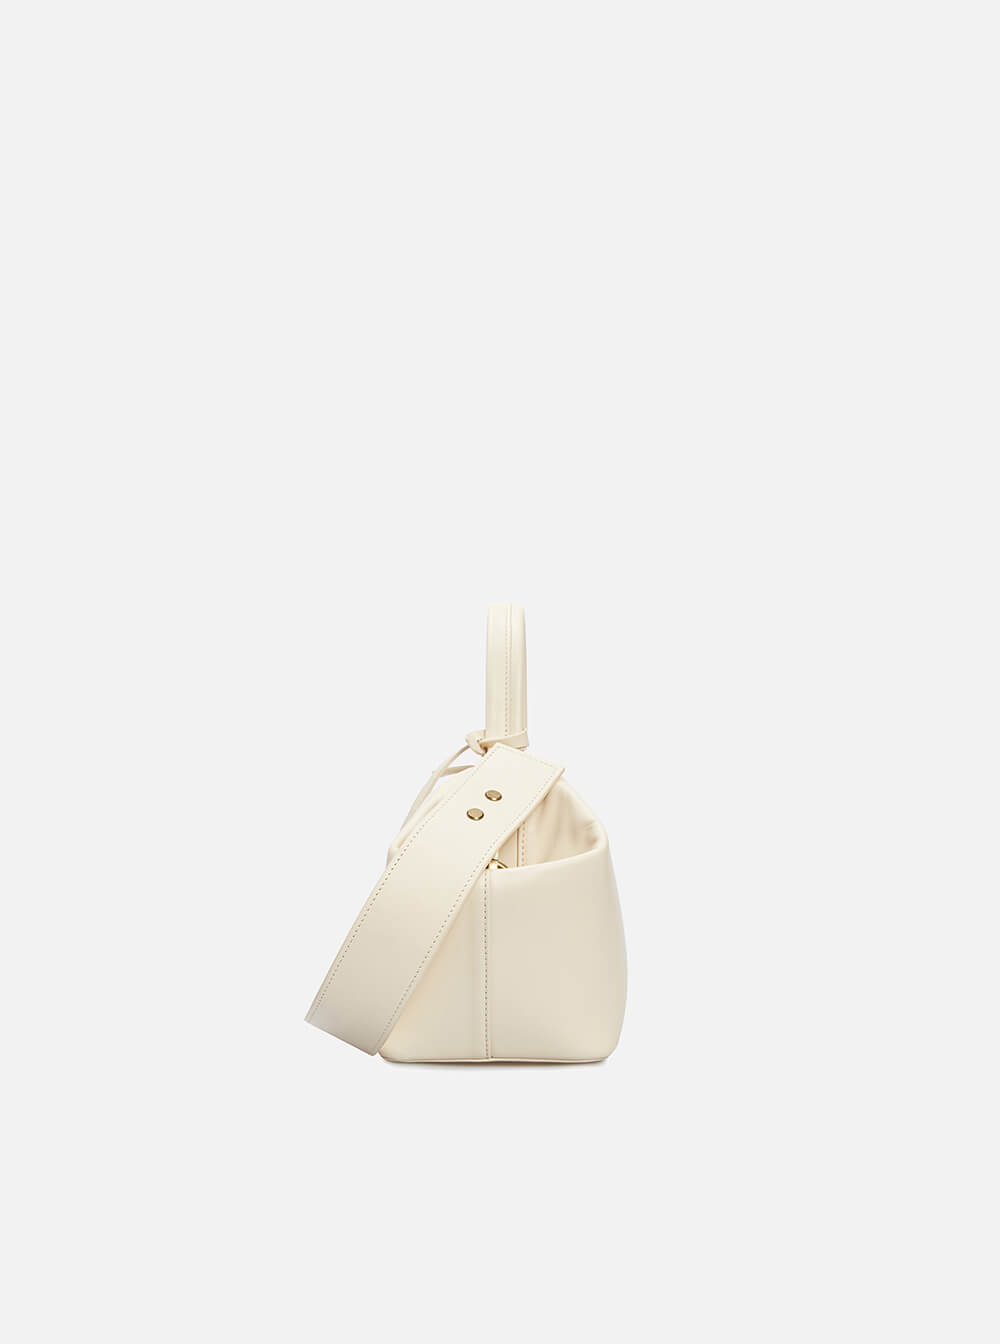 Baguette Ivory - GRIE bags